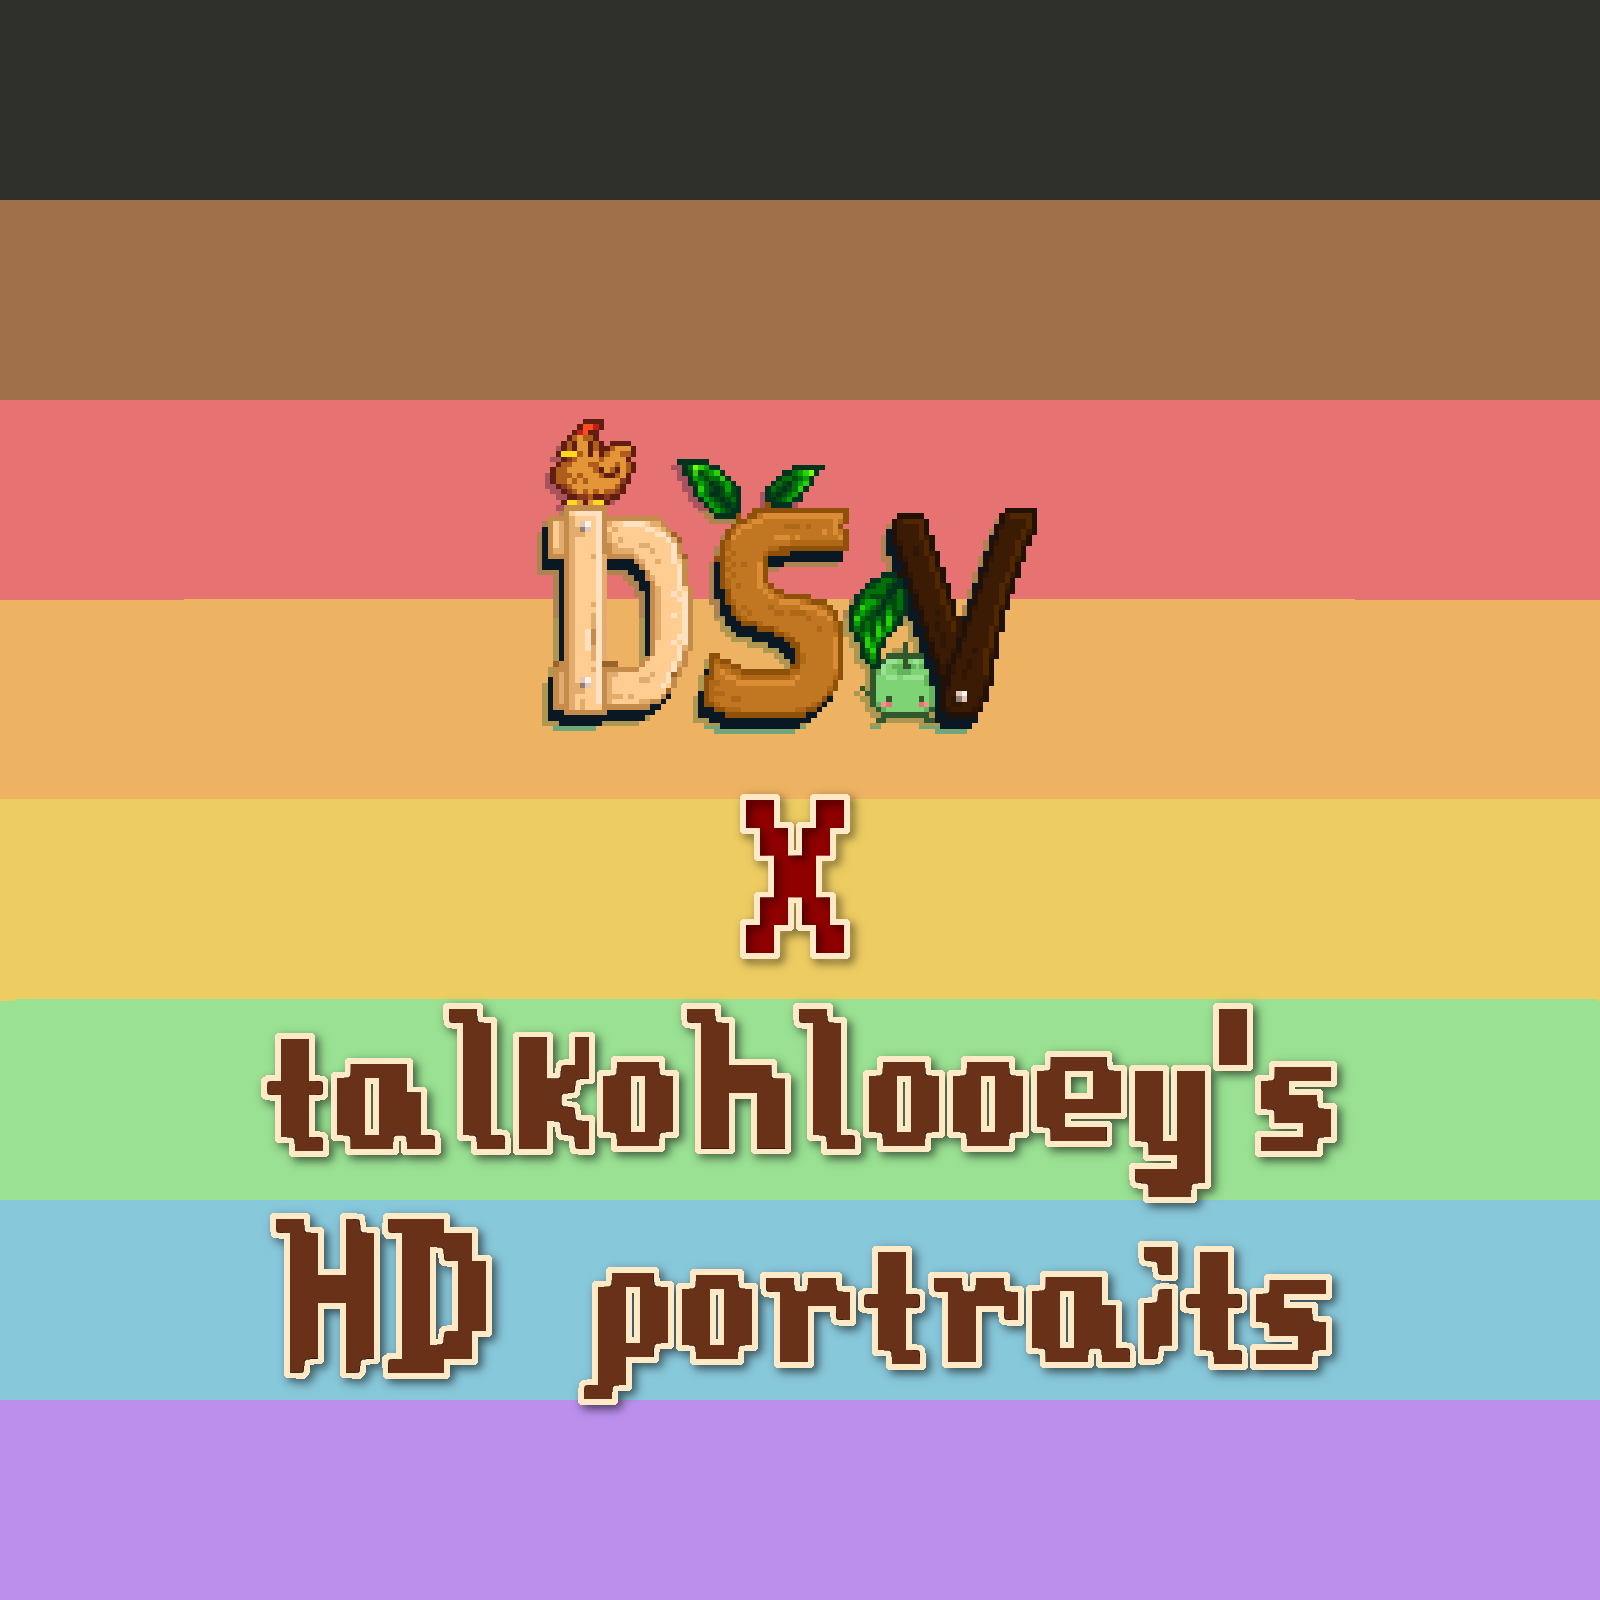 FlashShifter on X: talkohlooeys on Nexus Mods designed HD portraits of the  SVE characters, perfectly capturing their personalities! Check out their  portrait mod here:  #StardewValley  #StardewValleyExpanded